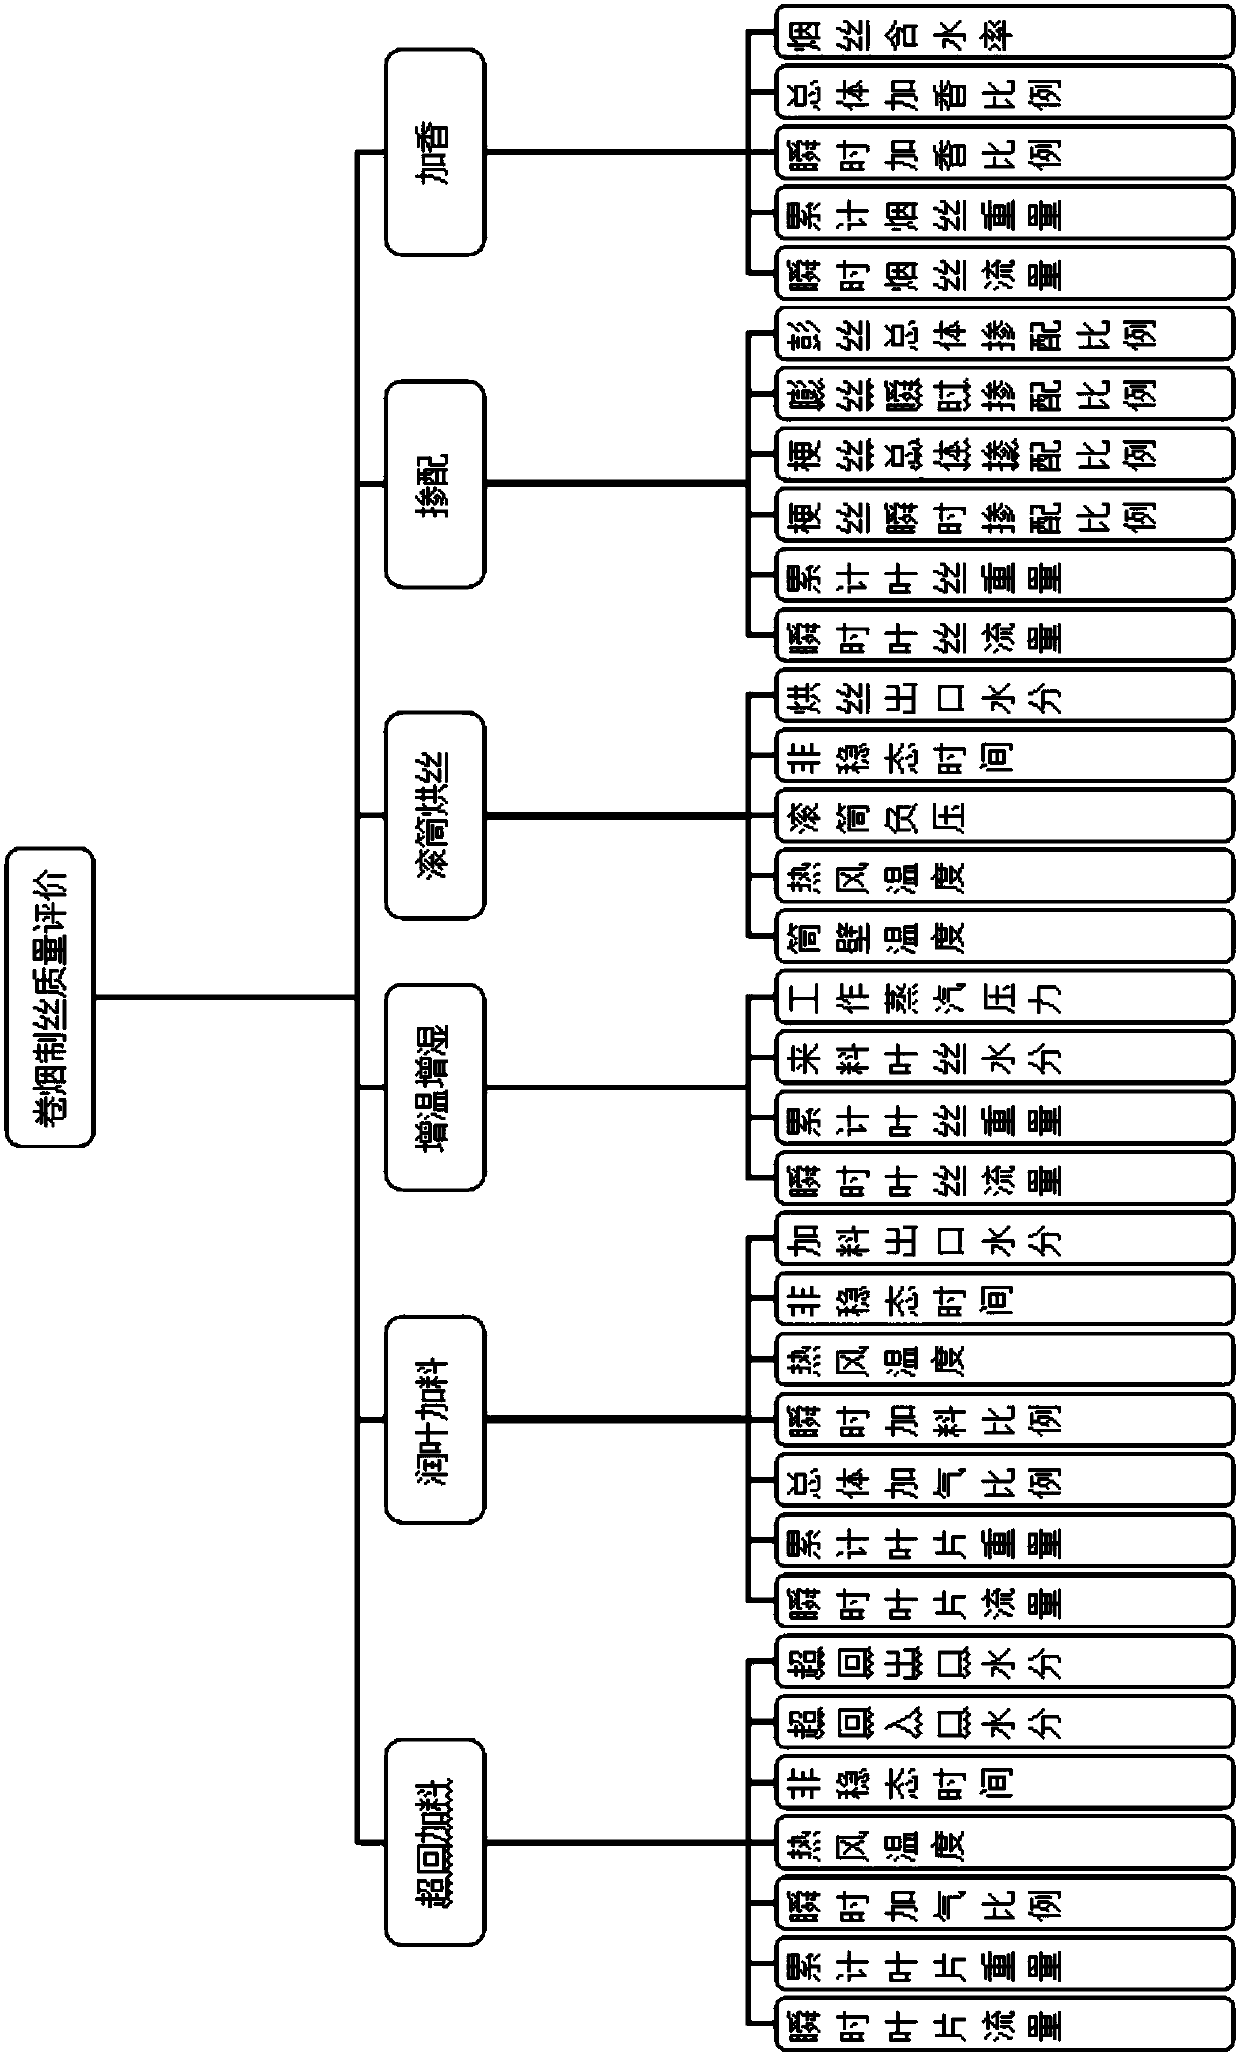 Method of constructing cigarette cut tobacco quality evaluation model based on analytic hierarchy process (AHP)